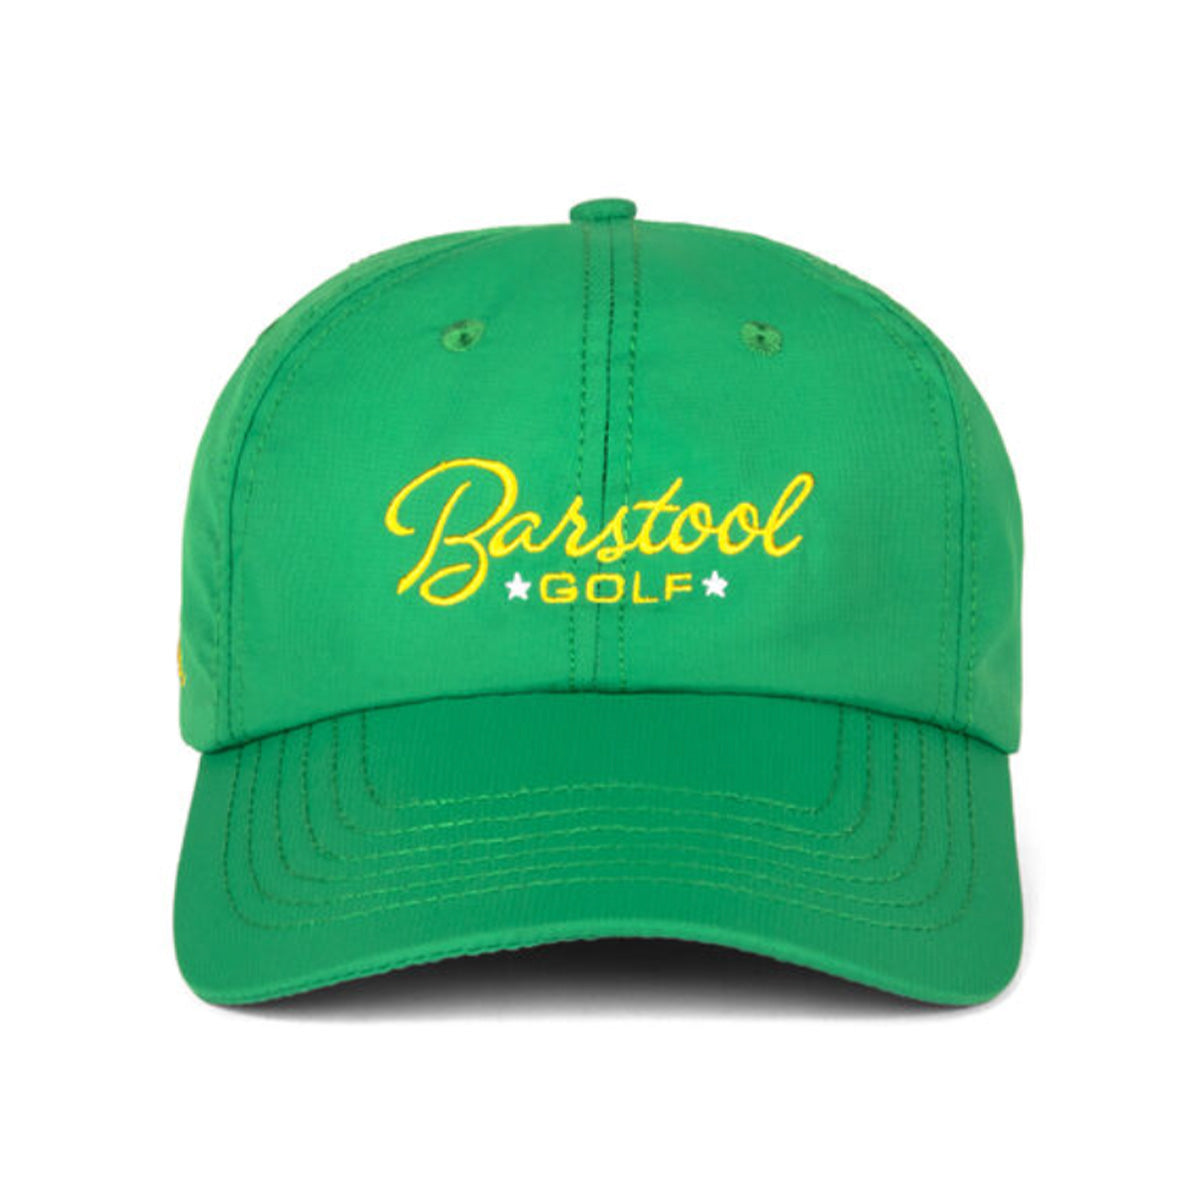 Barstool Golf Performance Hat-Hats-Fore Play-One Size-Green-Barstool Sports